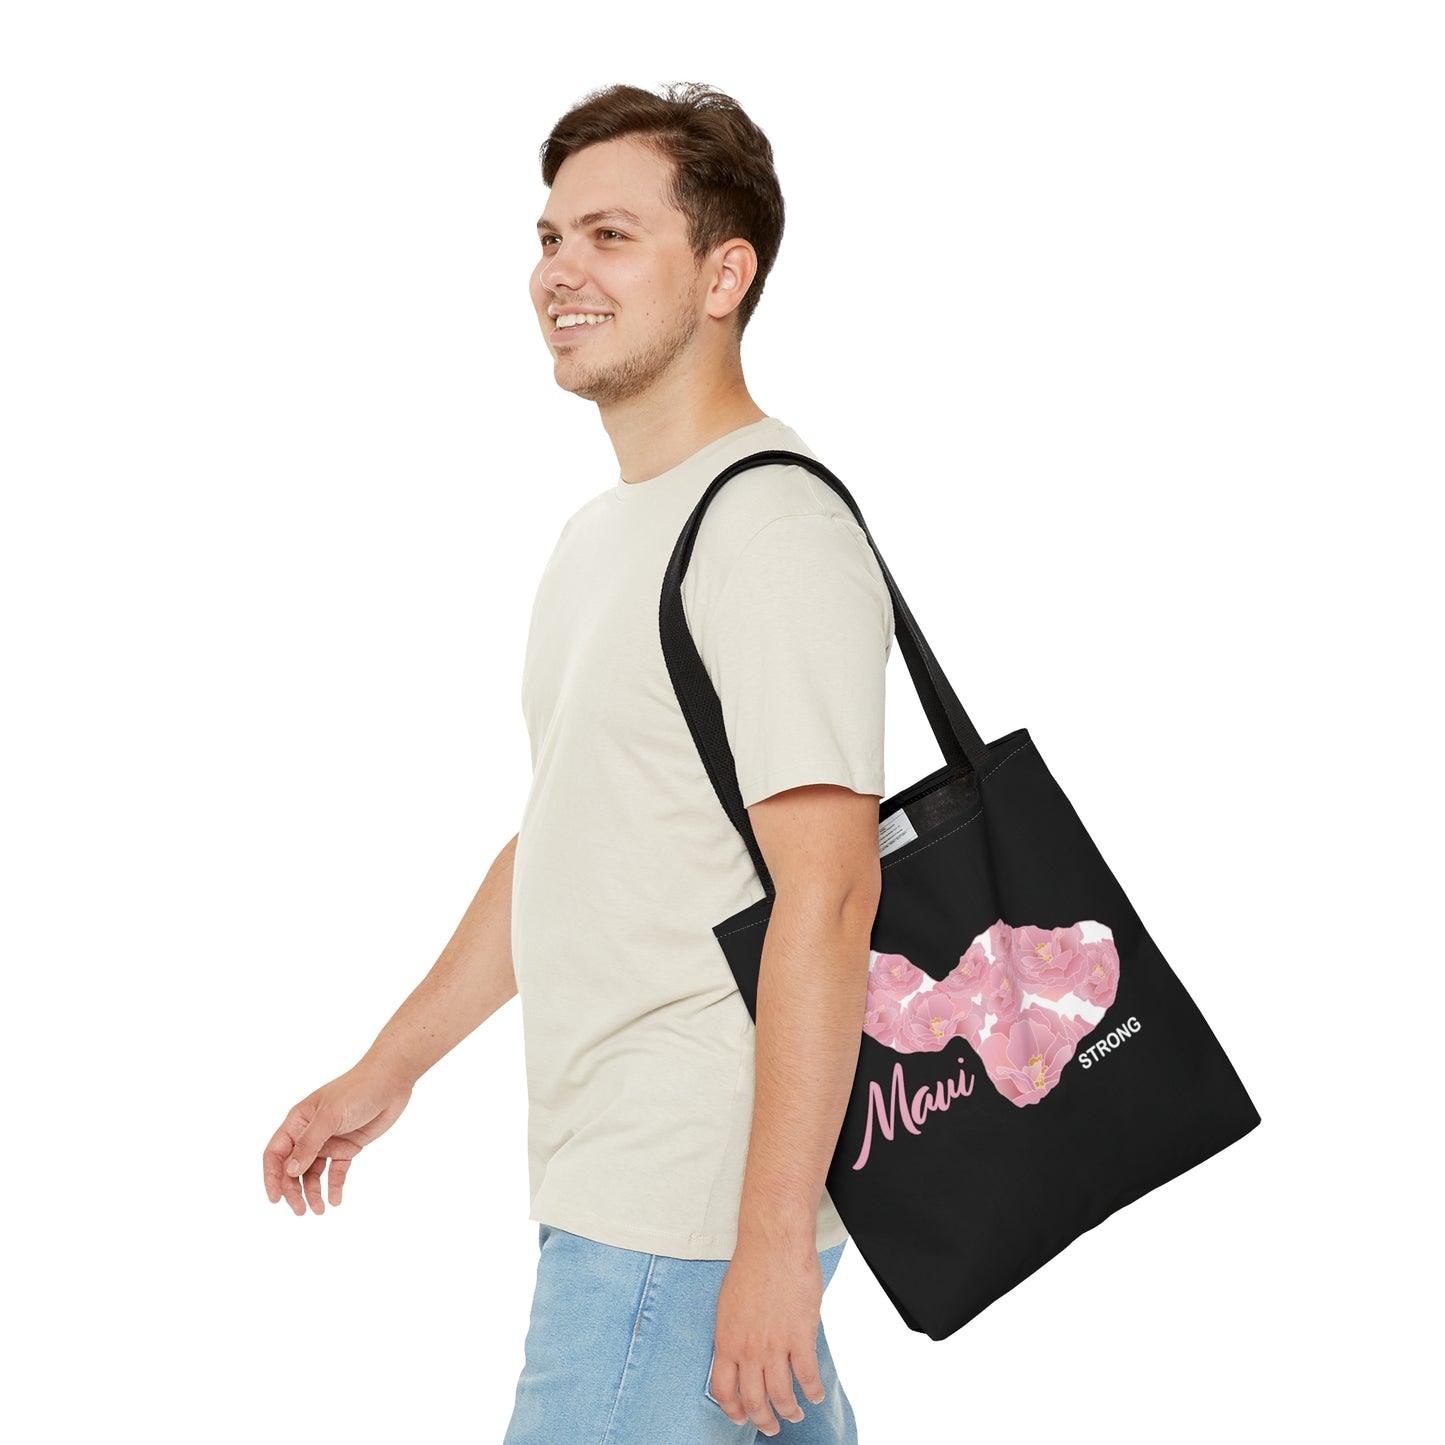 Tote bag- Maui Strong Lokelani Rose Island in Black and Pink, Maui Support for Lahaina Wildfires, Fundraiser, Profits Donated